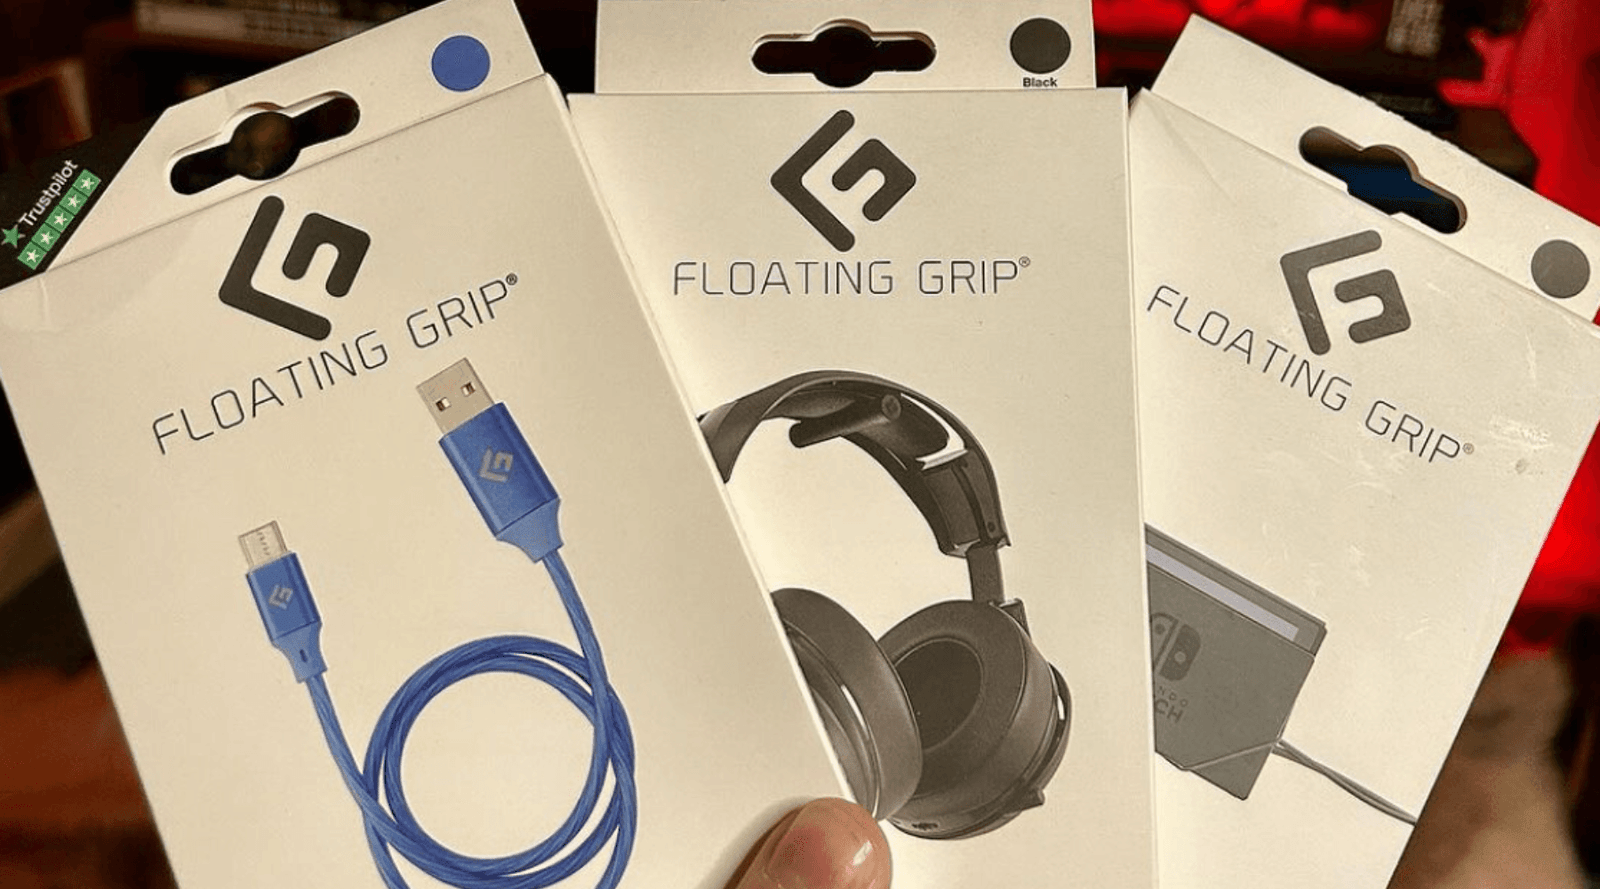 Elevate the Celebration: Top 5 Birthday Gift Ideas for Gamers with FLOATING GRIP - FLOATING GRIP